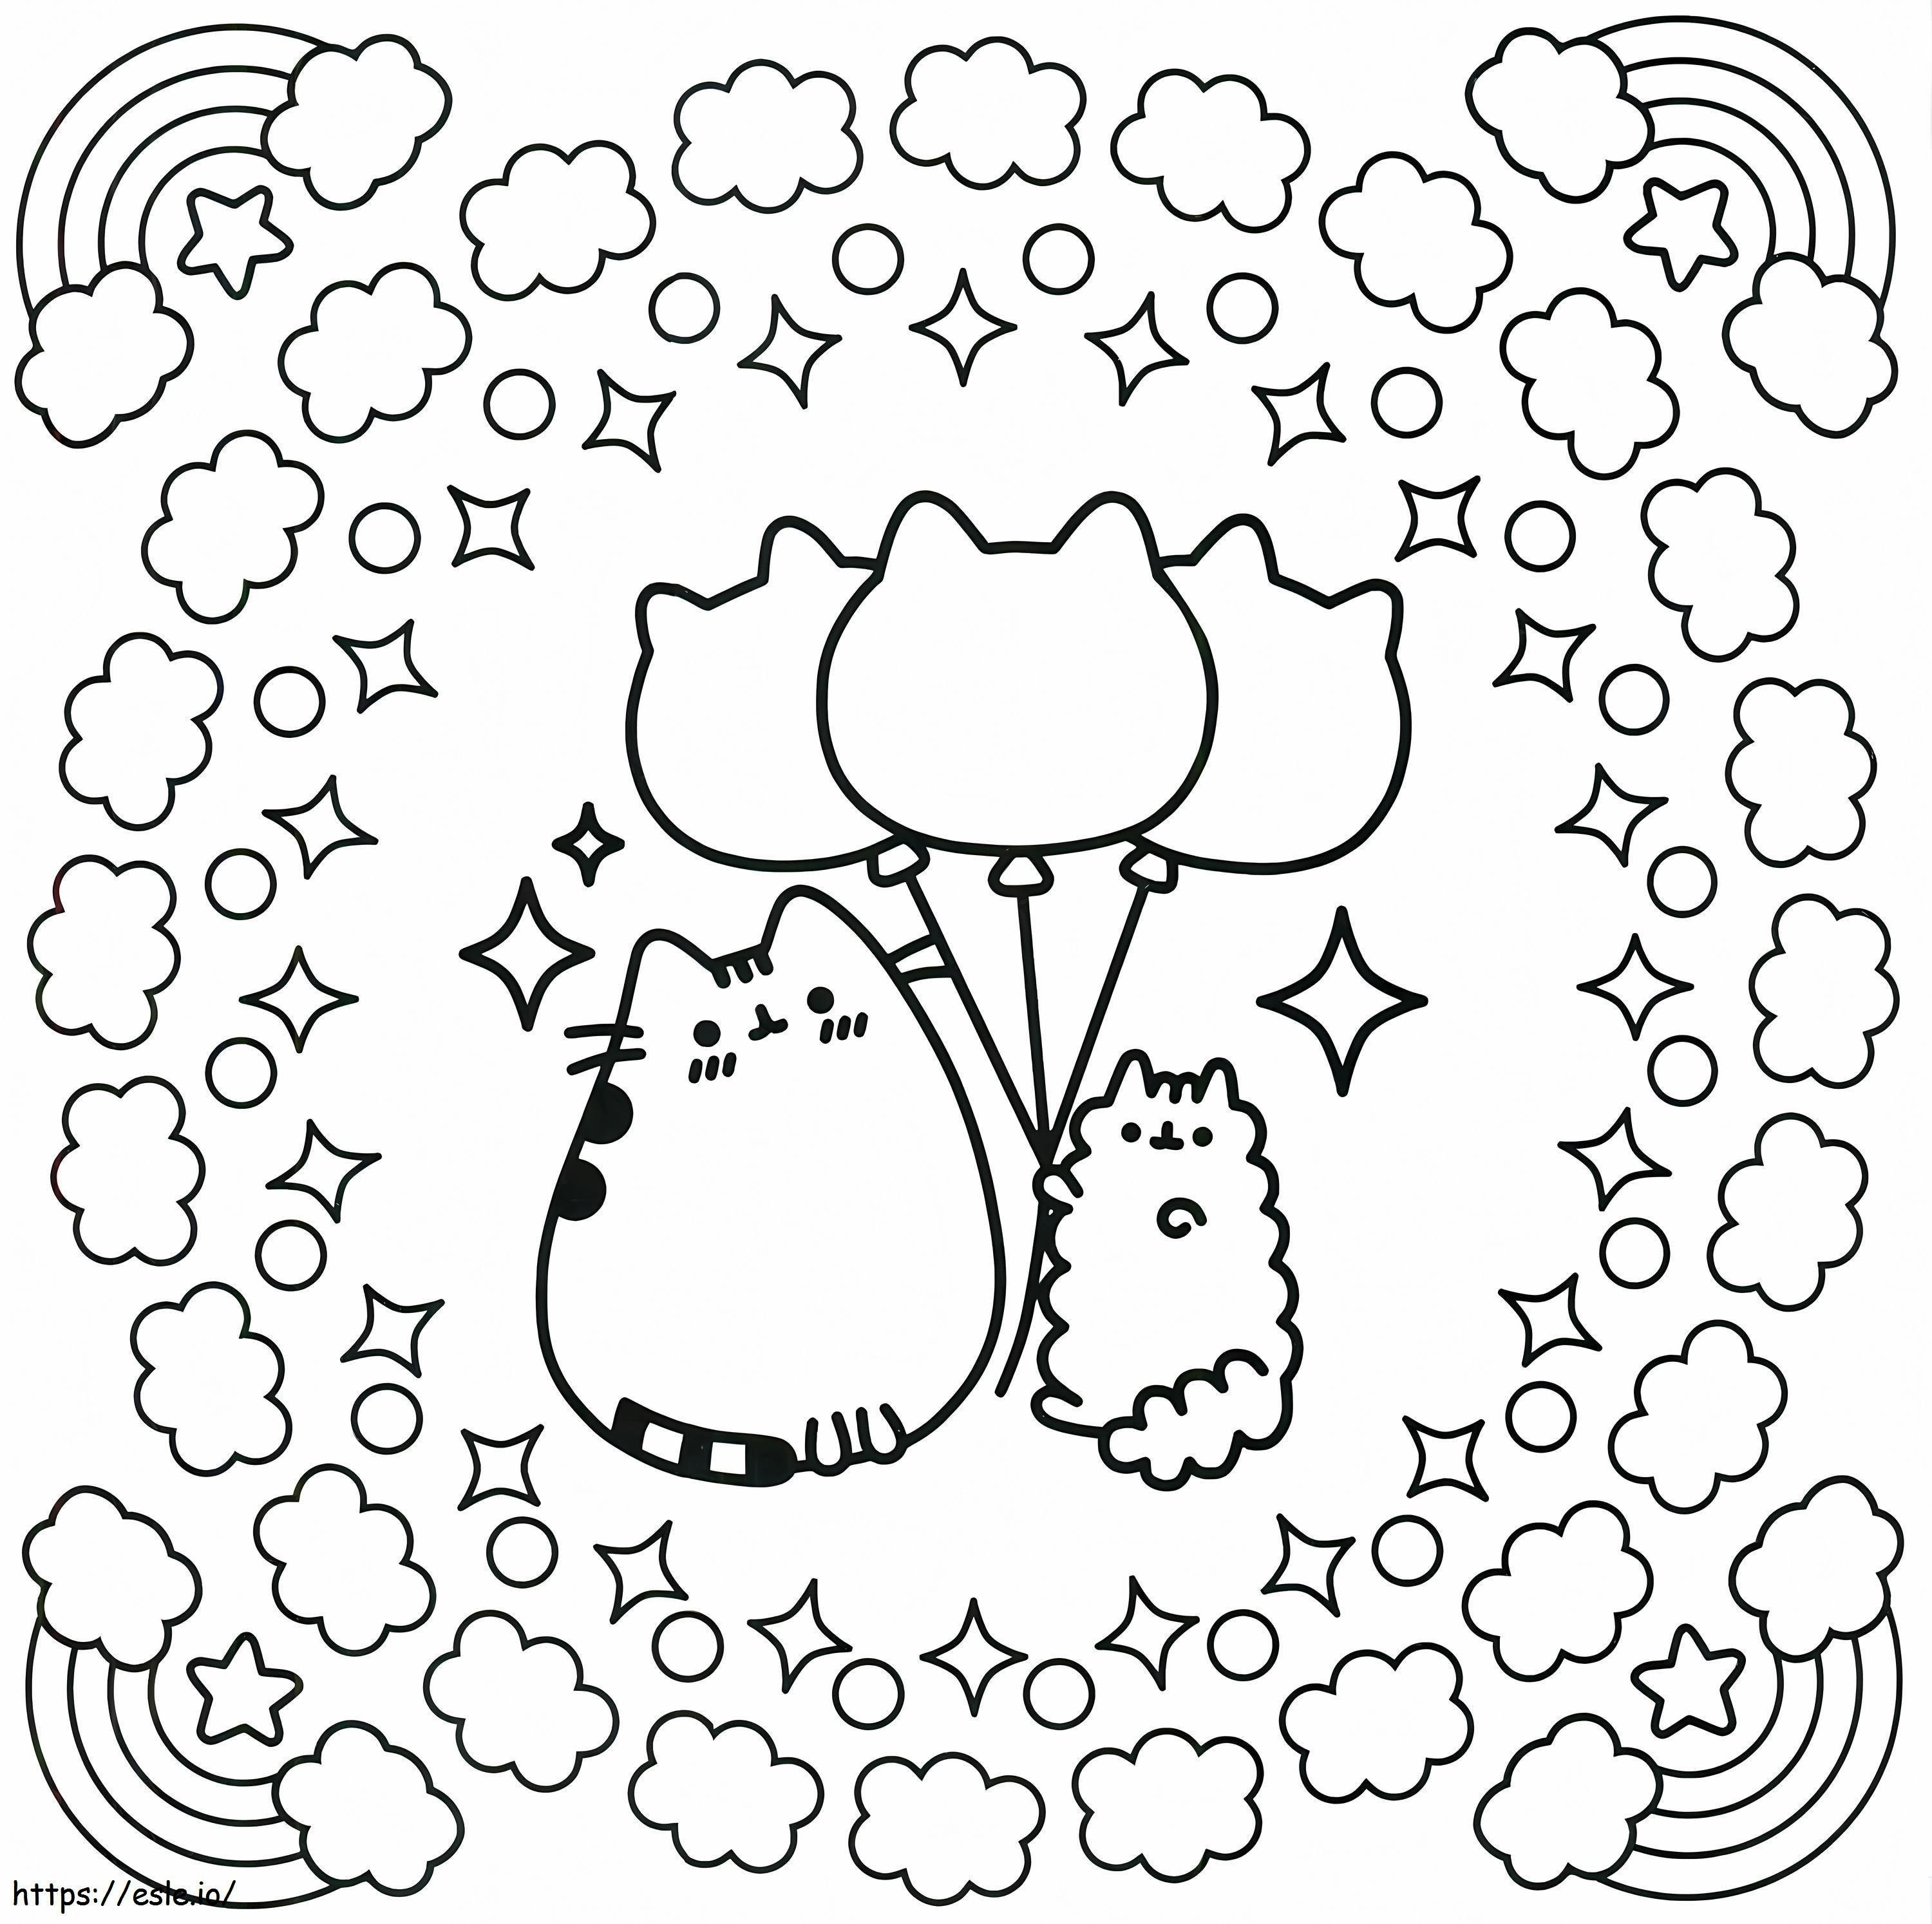 Cool Pusheen Picture coloring page